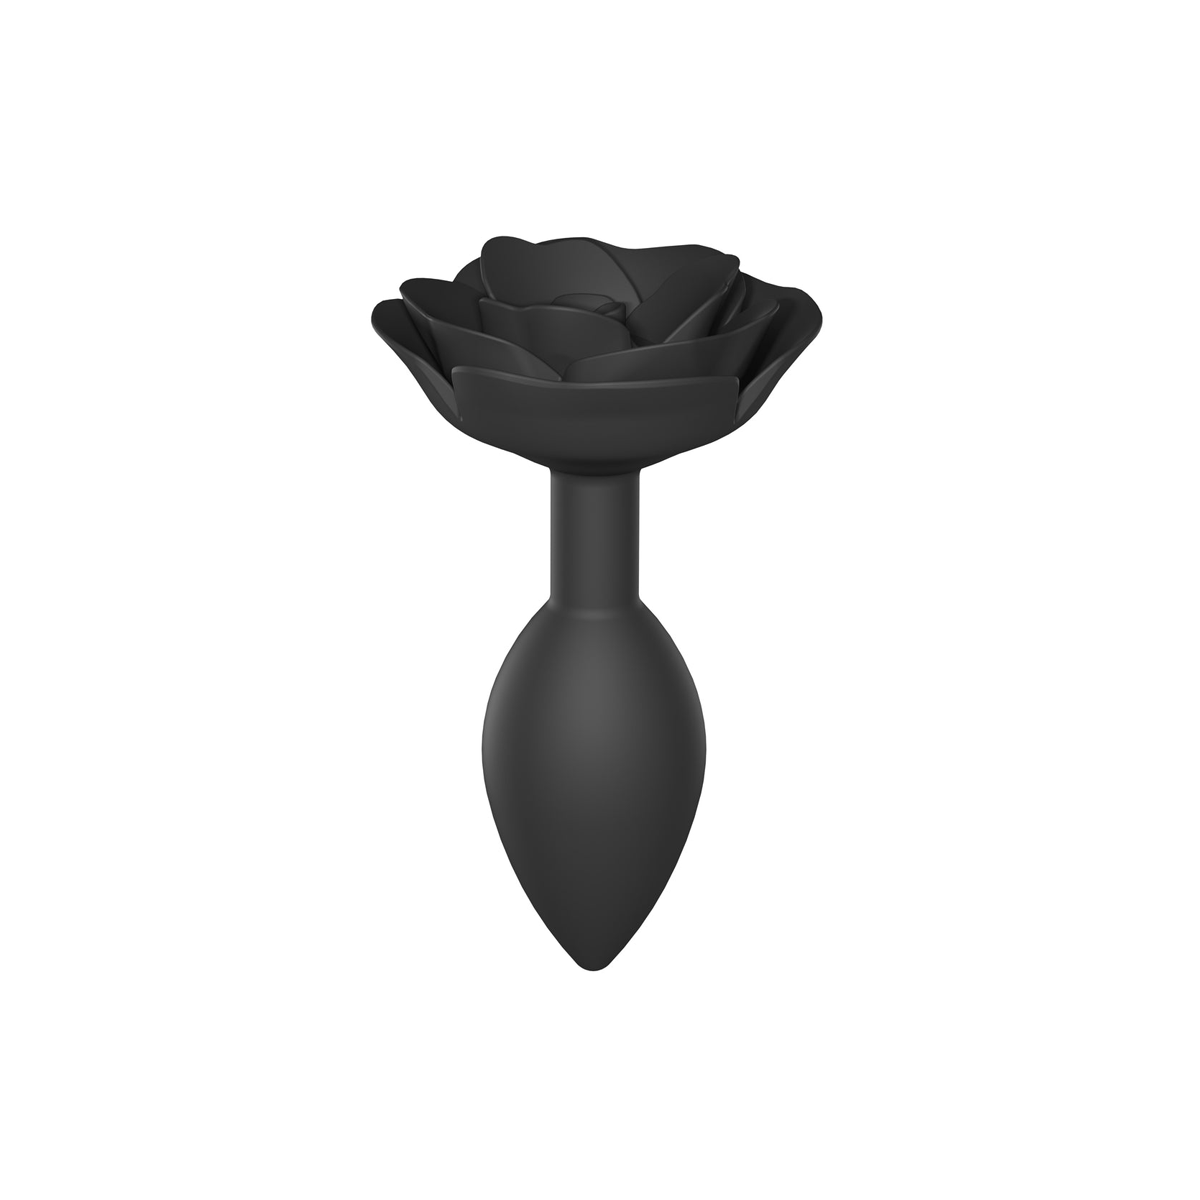 Black silicone butt plug with rose-shaped tapered end Nudie Co